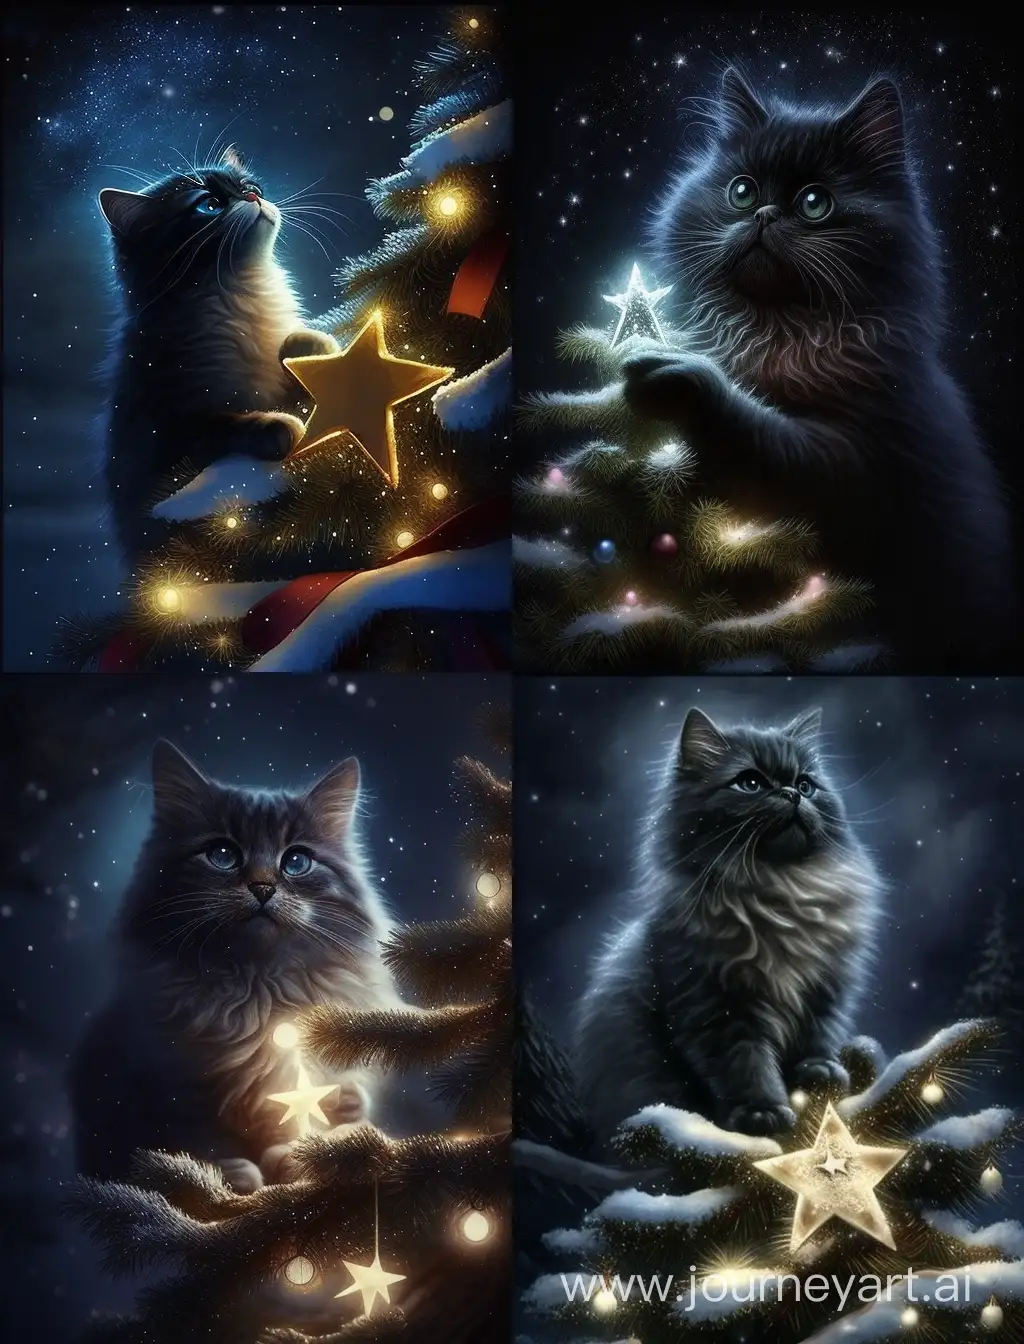 the cat on the Christmas tree moves his paw to the star on the Christmas tree at night
